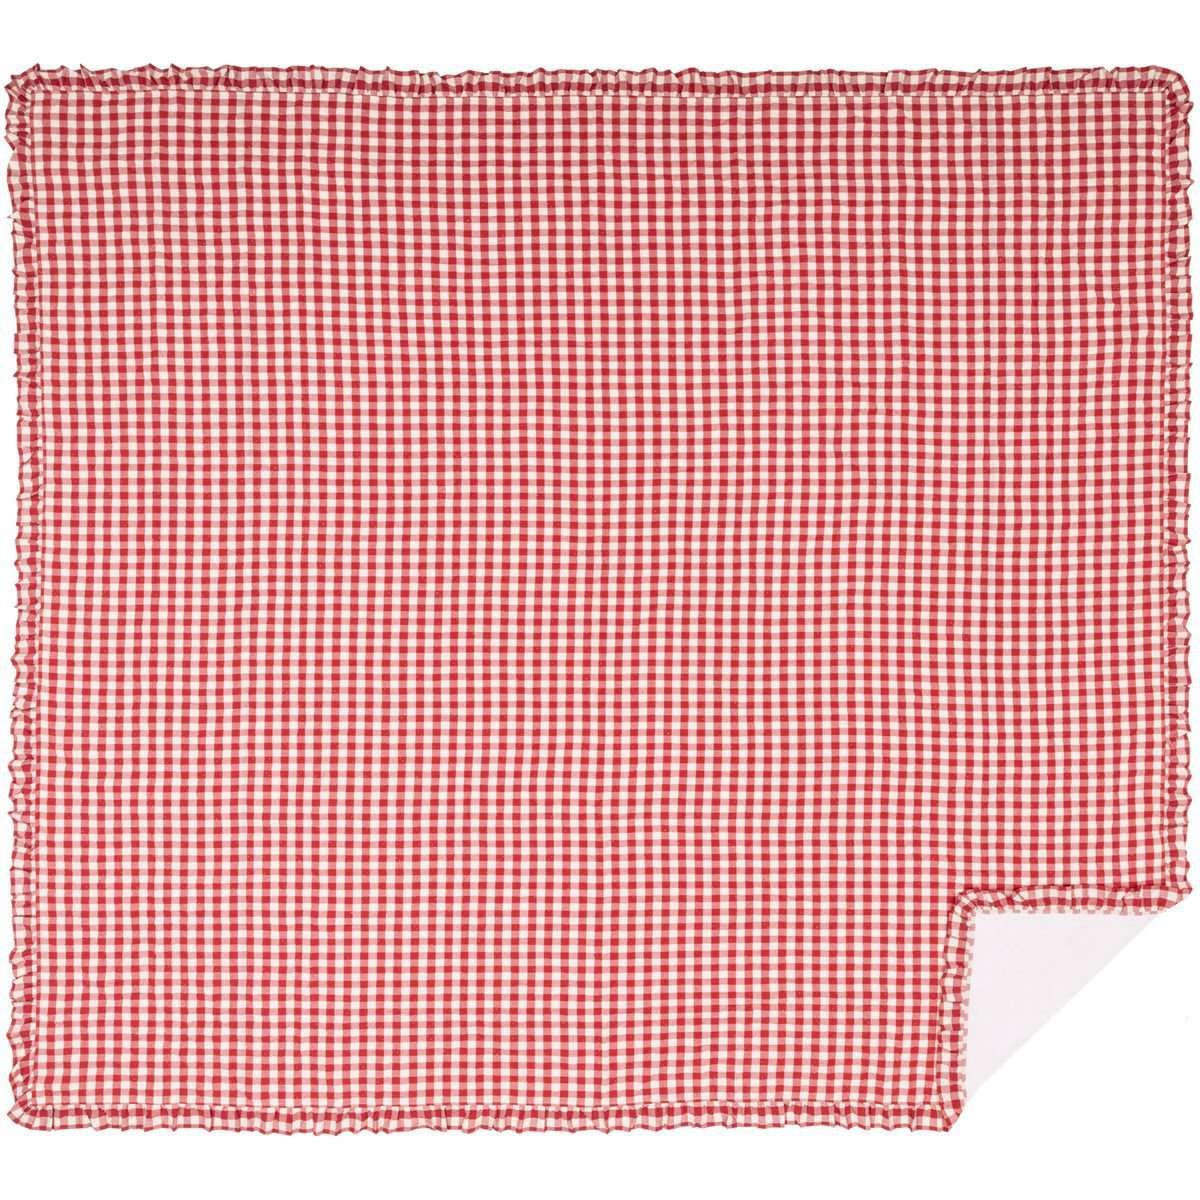 Annie Buffalo Red Check Ruffled Quilt Coverlet VHC Brands - The Fox Decor